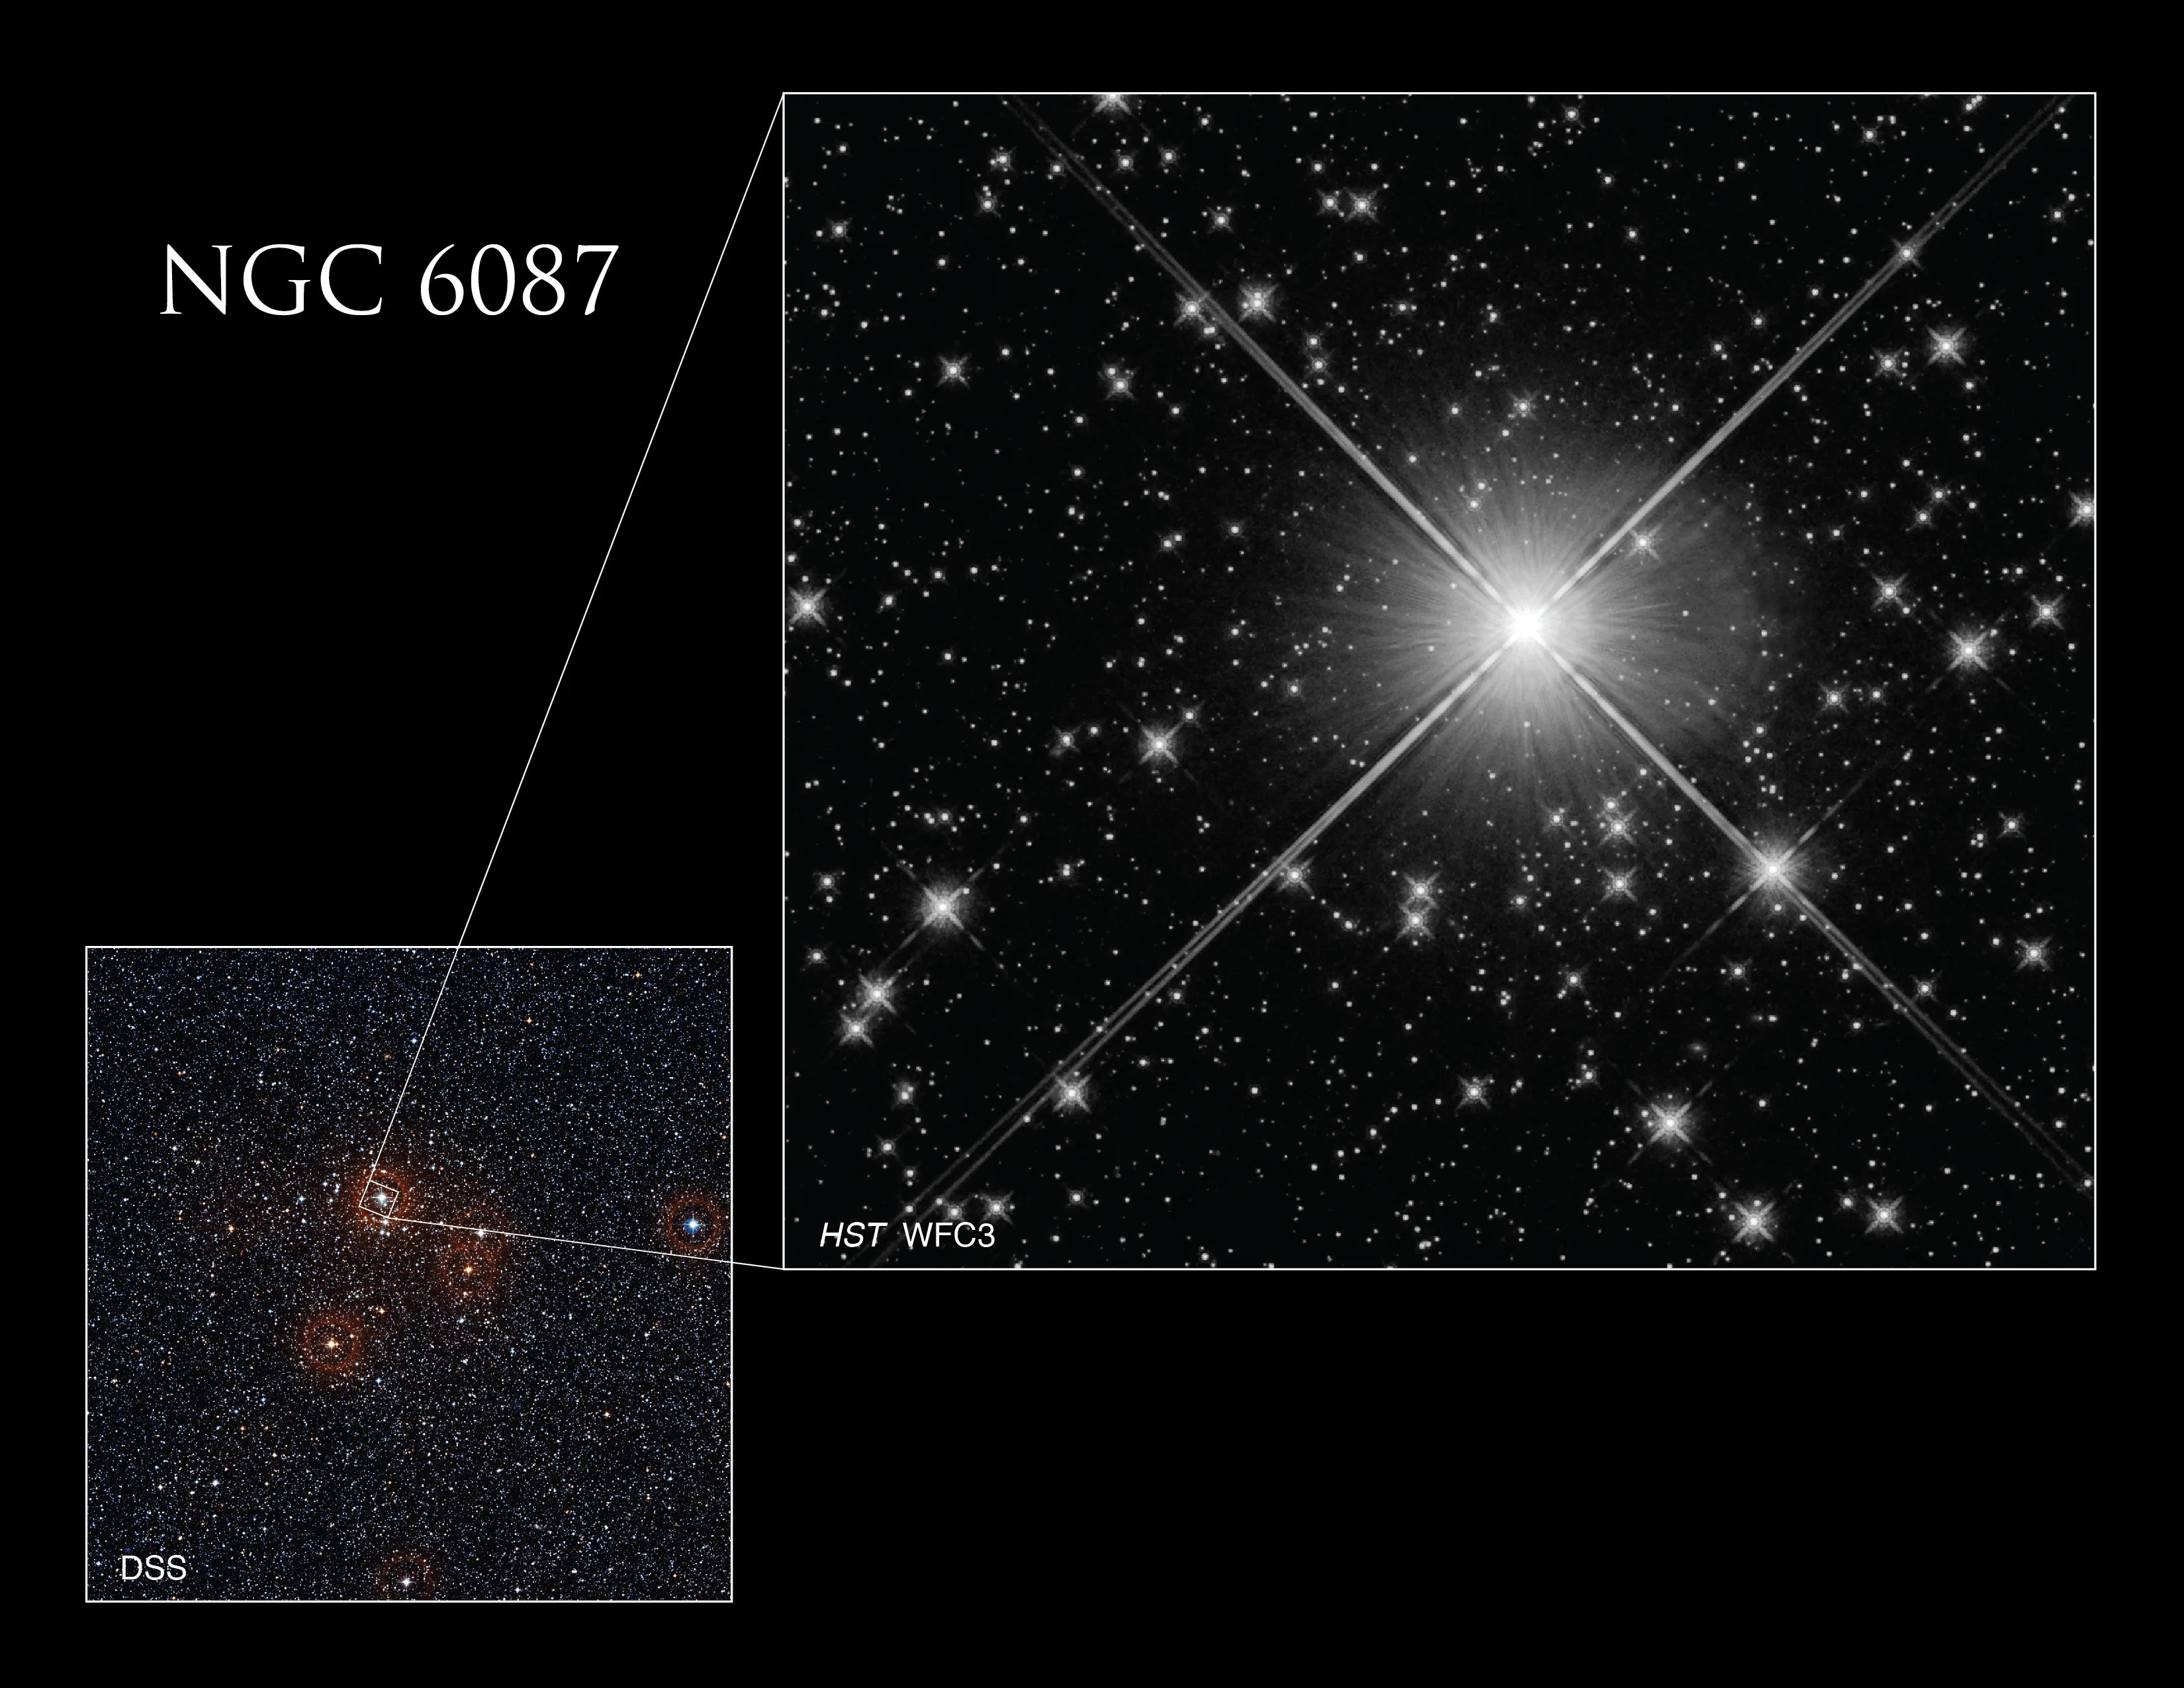 The Digitized Sky Survey (DSS) image in the lower left shows the star cluster Caldwell 89 (NGC 6087) as seen from the ground. It consists of a field of stars, some haloed in reddish light. The small square in that image shows the field observed by Hubble’s Wide Field Camera 3 (WFC3), which is on the right and features the bright star S Normae.Caldwell 89 in the center of the image, surrounded by lesser stars.